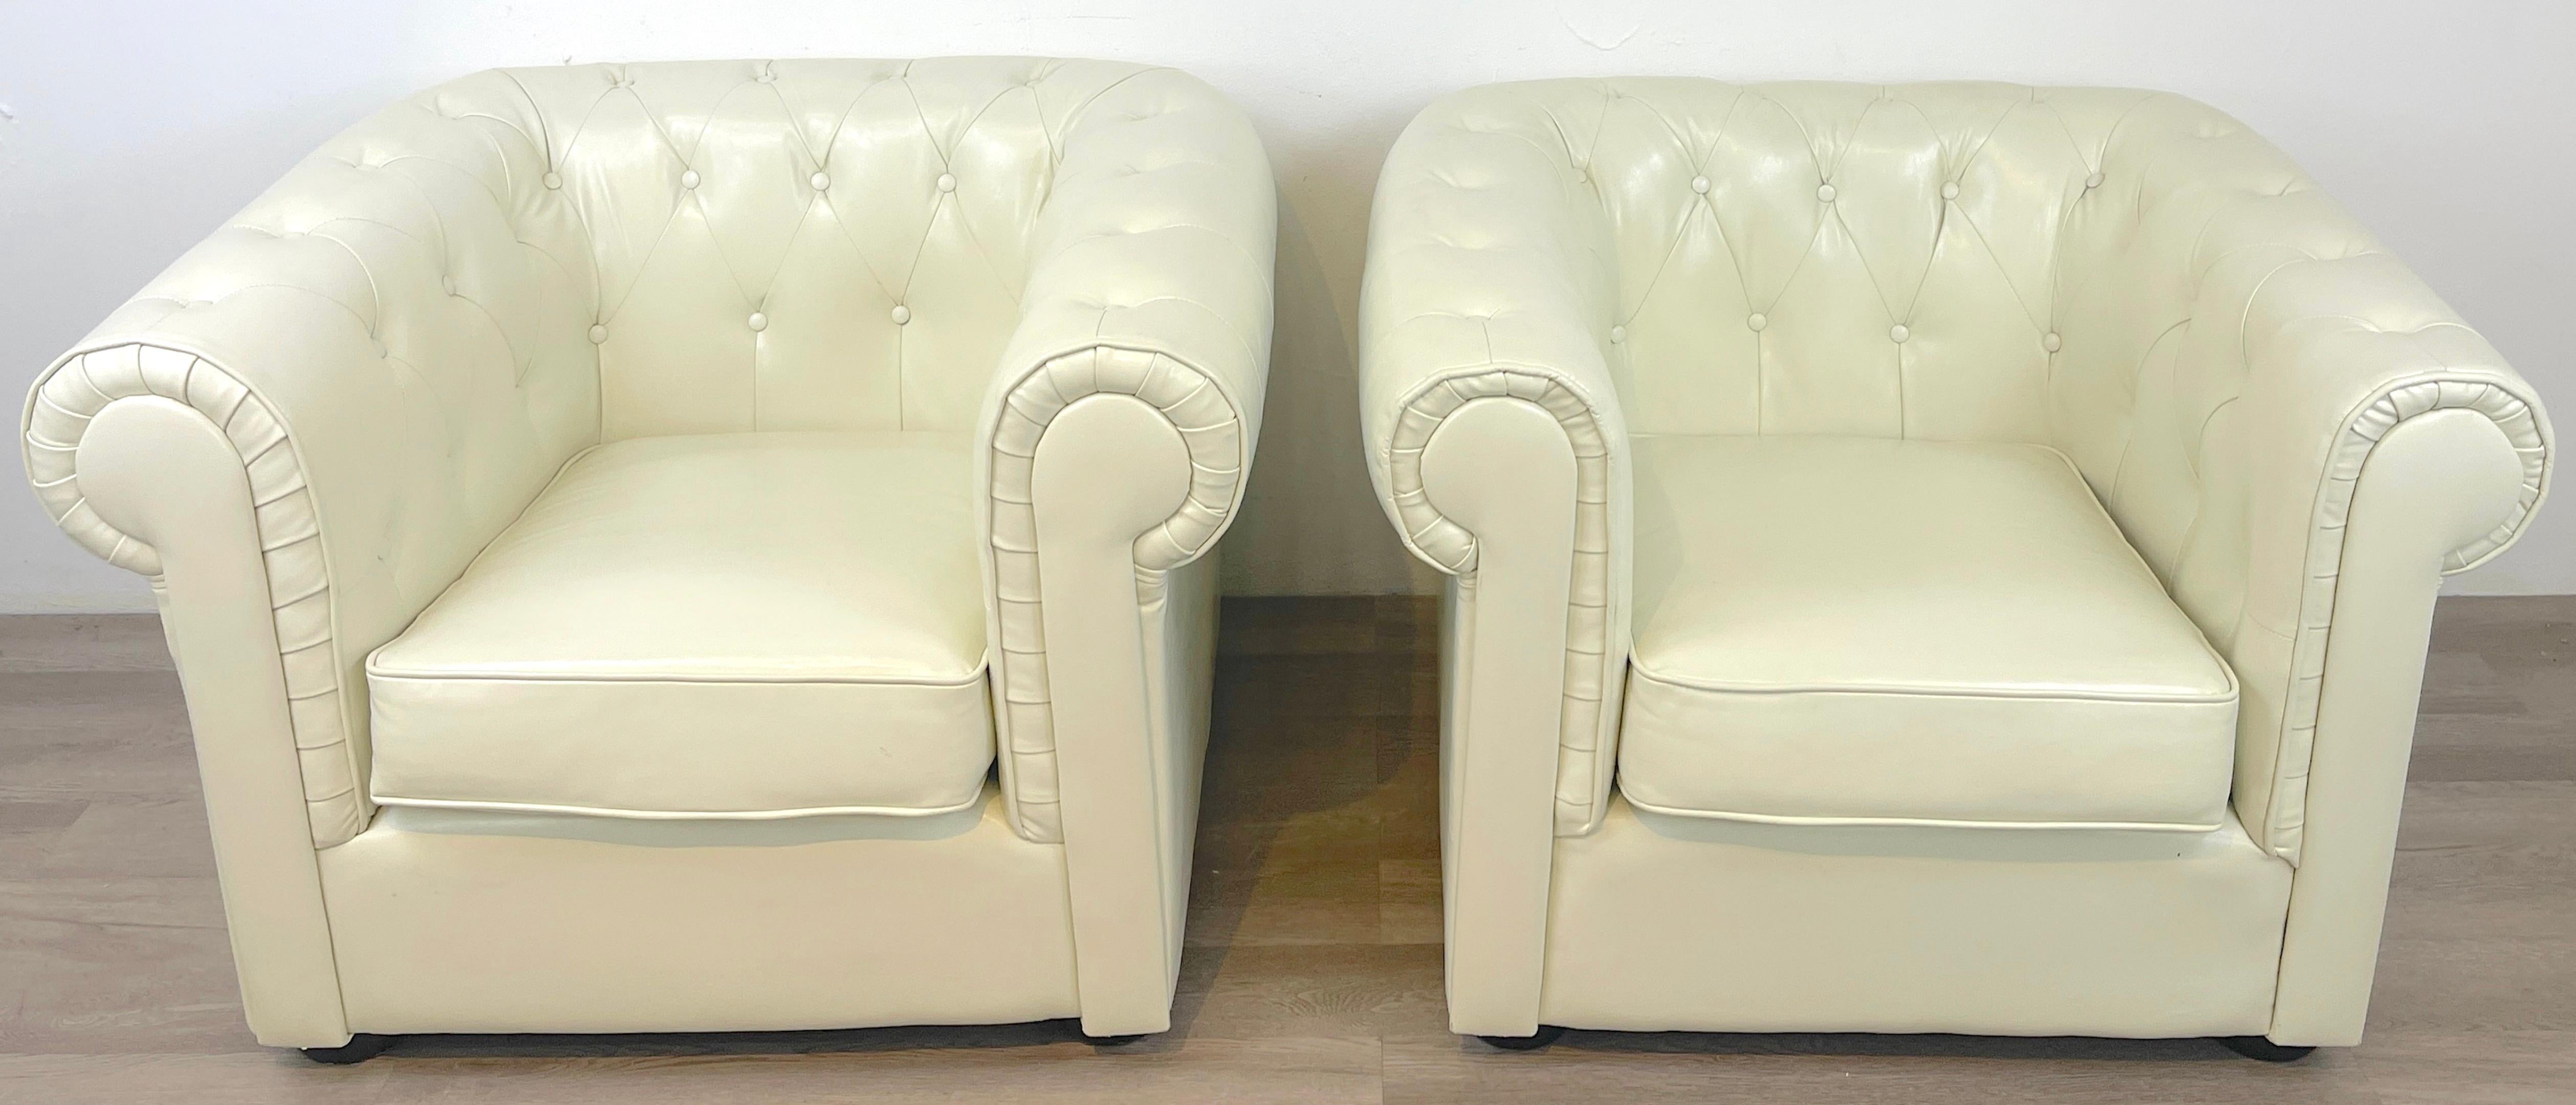 Pair of white leather chesterfield club chairs, each one of generous size, with rolled arms, tufted continuous backrest. Excellent vintage condition, ready to place.
Each chair is 40